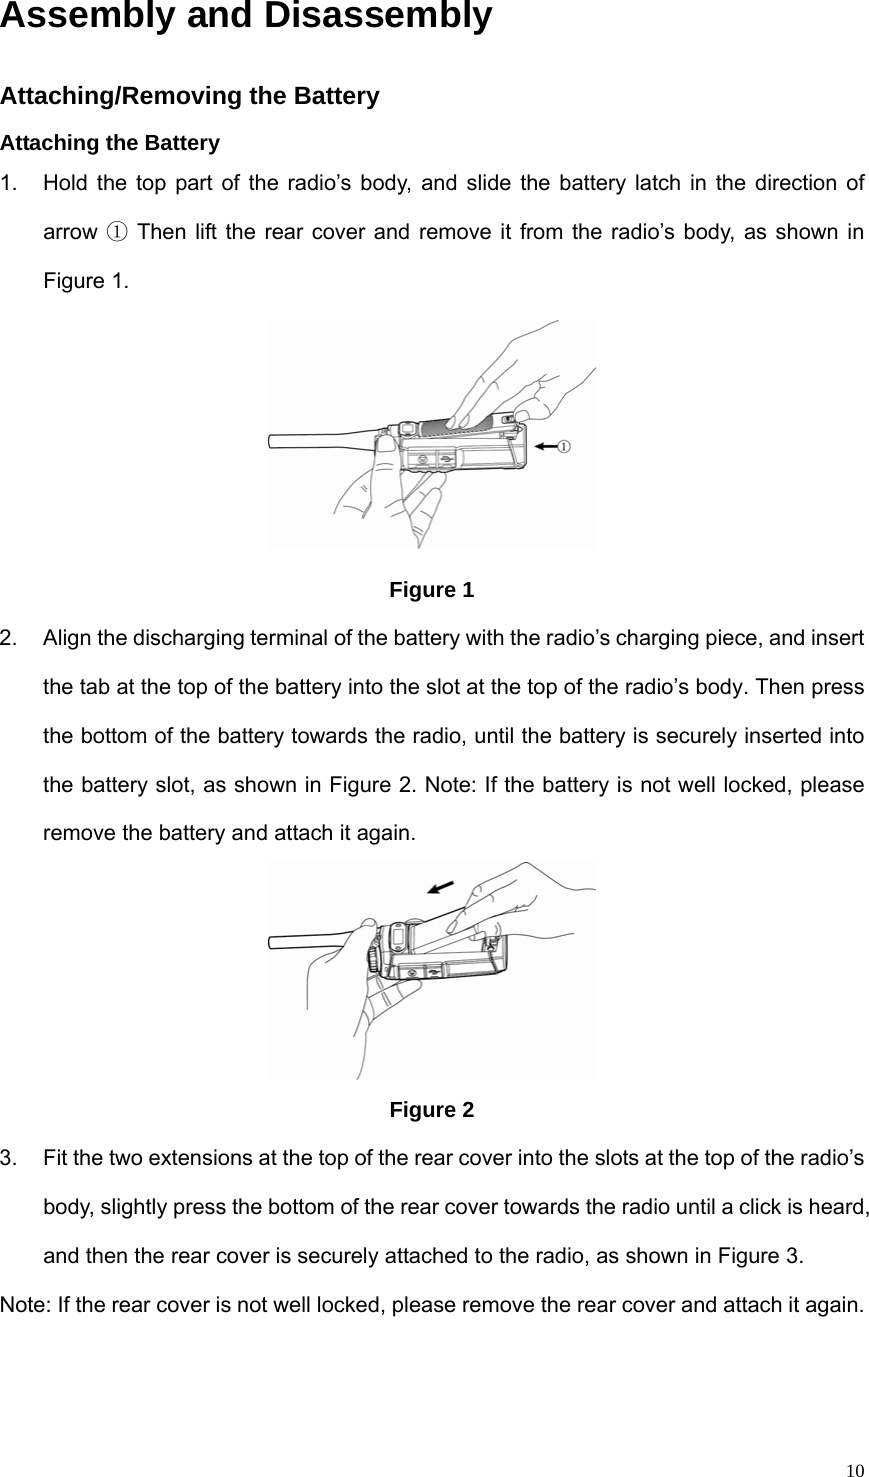   10Assembly and Disassembly Attaching/Removing the Battery Attaching the Battery 1.  Hold the top part of the radio’s body, and slide the battery latch in the direction of arrow  ① Then lift the rear cover and remove it from the radio’s body, as shown in Figure 1.    Figure 1 2.  Align the discharging terminal of the battery with the radio’s charging piece, and insert the tab at the top of the battery into the slot at the top of the radio’s body. Then press the bottom of the battery towards the radio, until the battery is securely inserted into the battery slot, as shown in Figure 2. Note: If the battery is not well locked, please remove the battery and attach it again.  Figure 2 3.  Fit the two extensions at the top of the rear cover into the slots at the top of the radio’s body, slightly press the bottom of the rear cover towards the radio until a click is heard, and then the rear cover is securely attached to the radio, as shown in Figure 3. Note: If the rear cover is not well locked, please remove the rear cover and attach it again. 